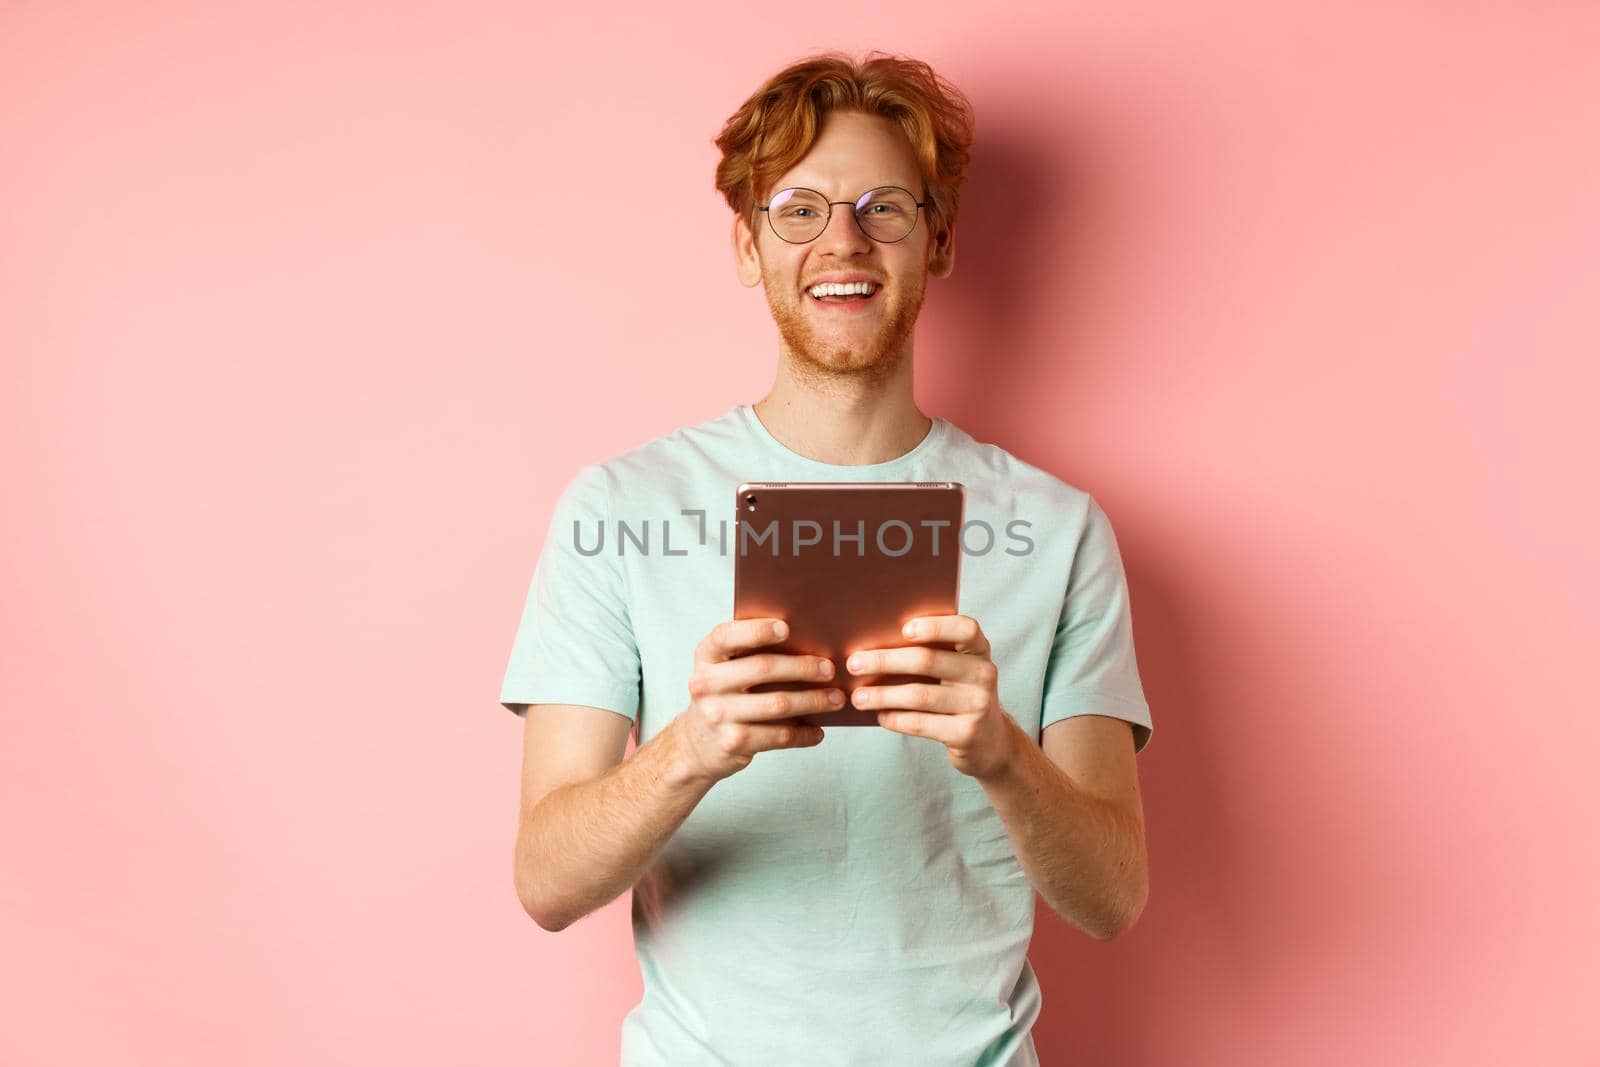 Cheerful caucasian man in t-shirt and glasses using digital tablet, looking happy at camera and smiling, standing over pink background.